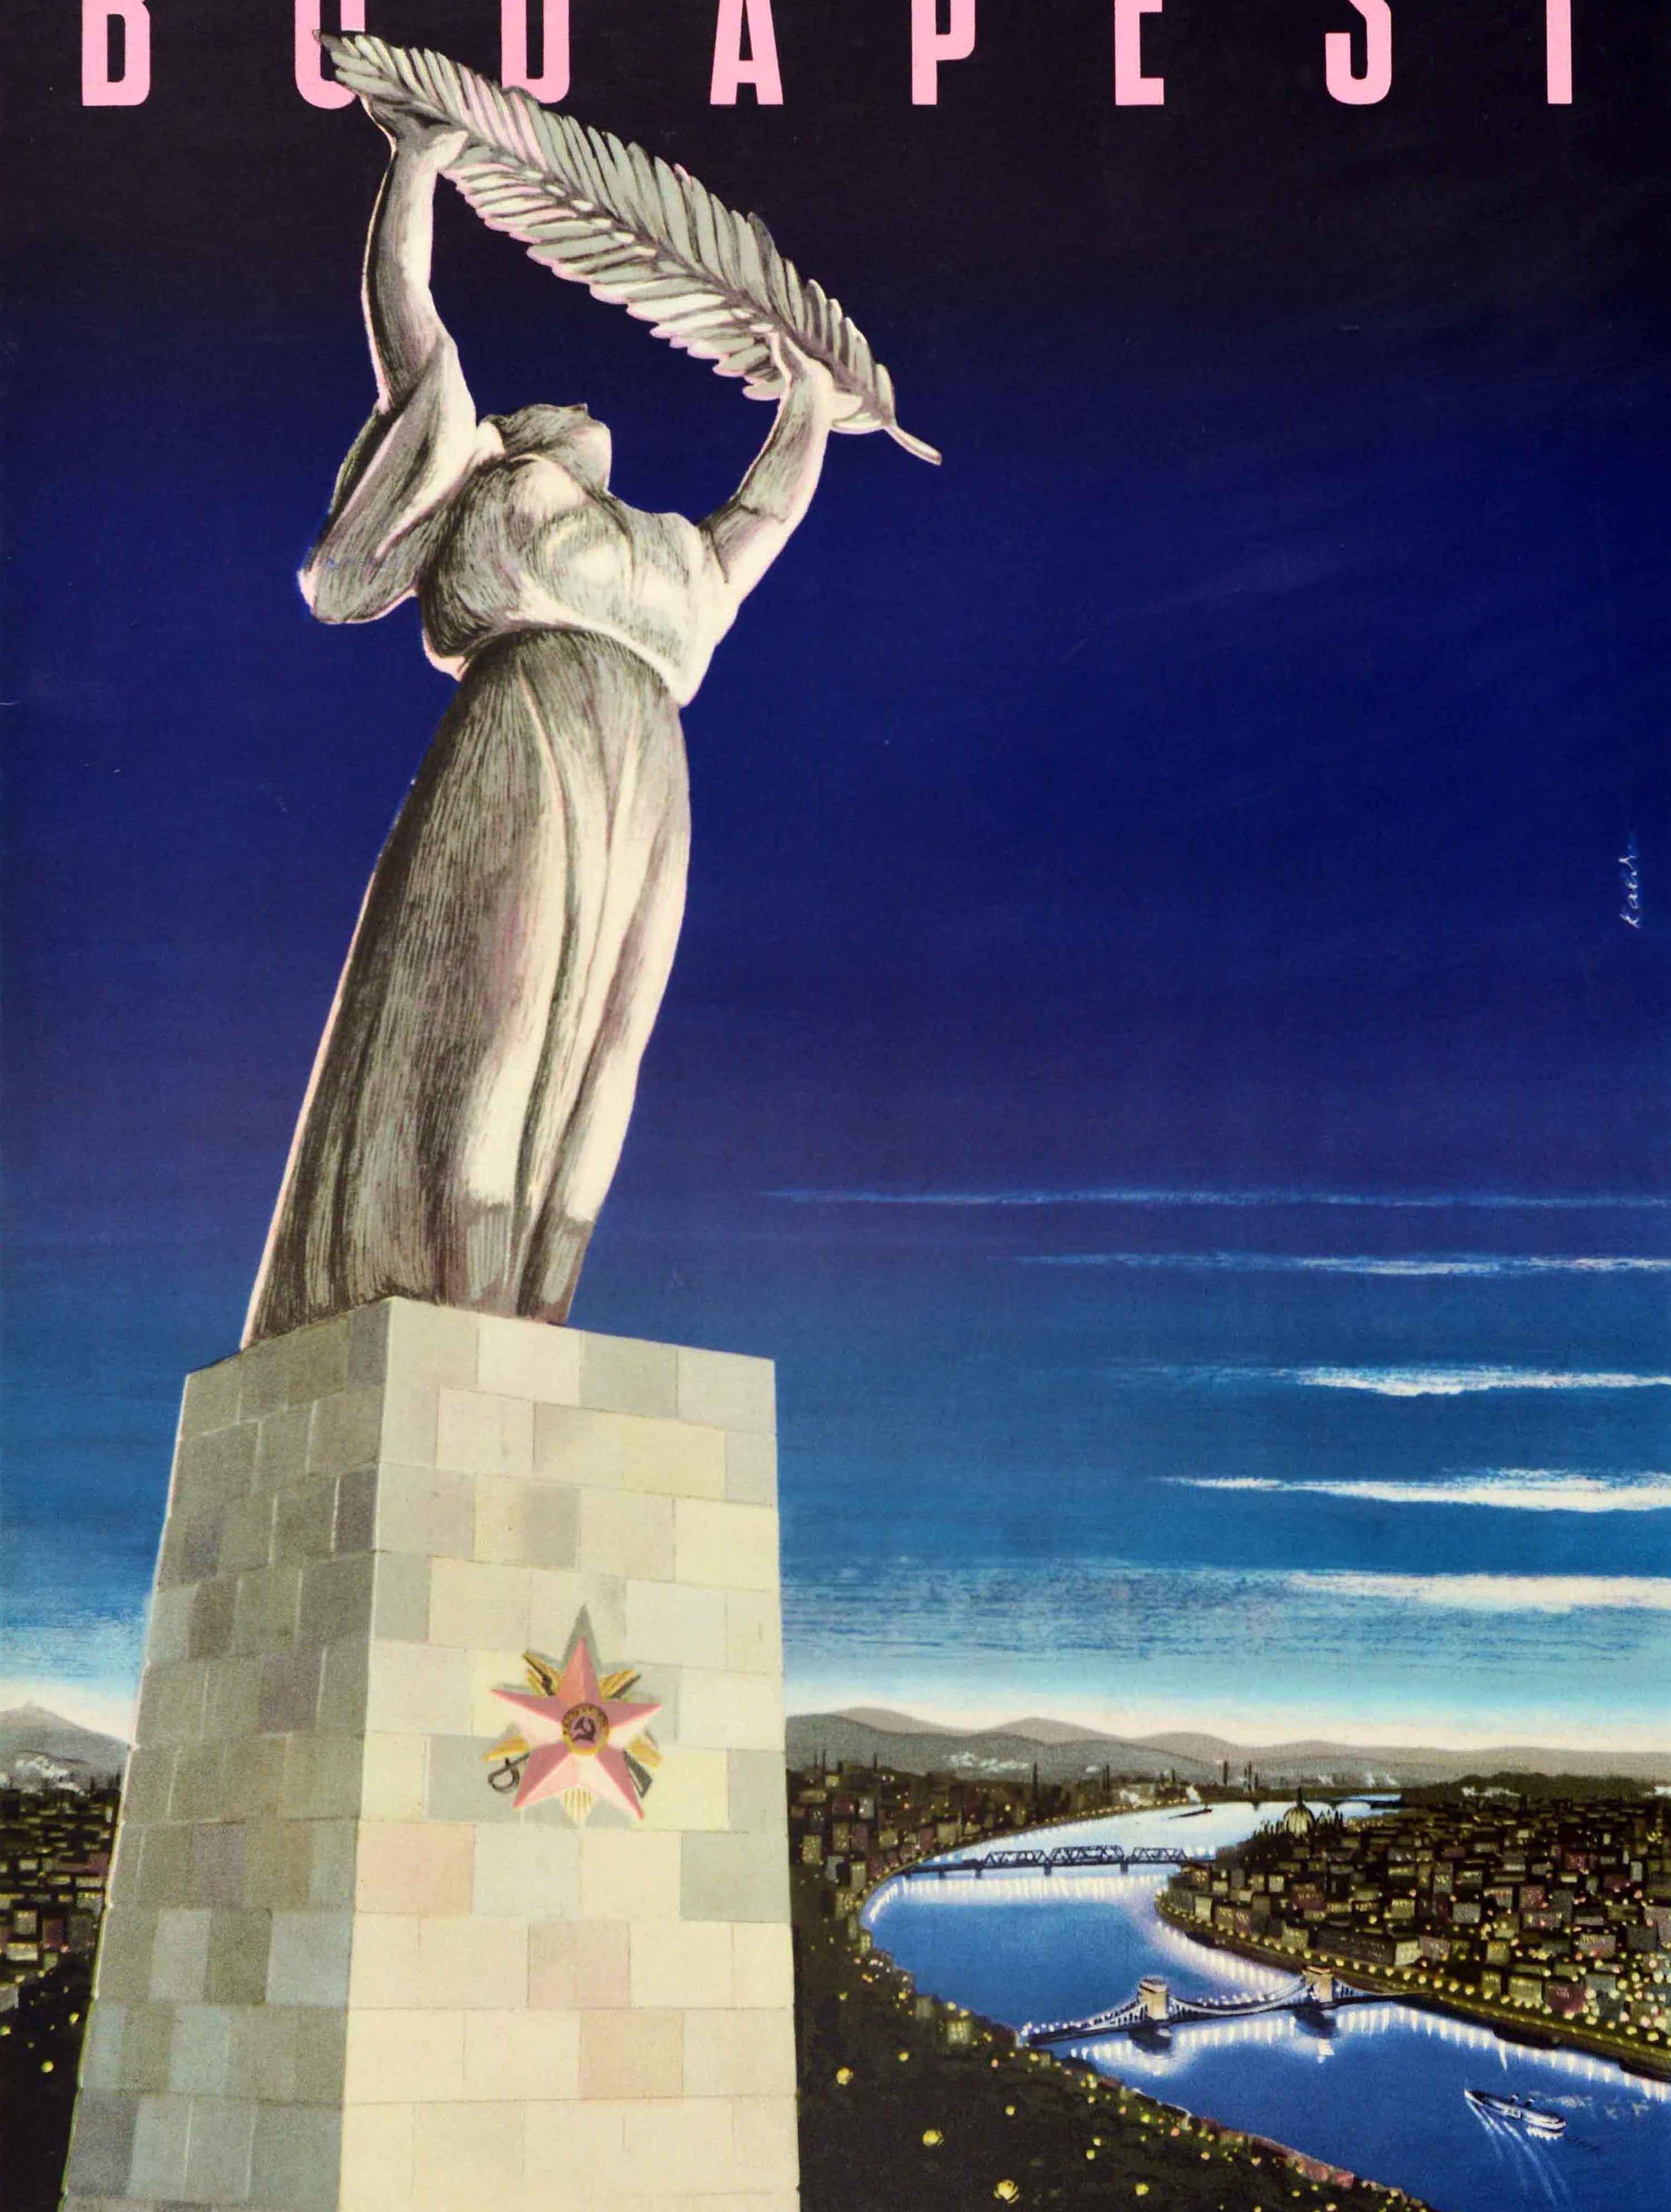 Mid-20th Century Original Vintage Travel Poster Budapest Hungary Freedom Statue Danube City View